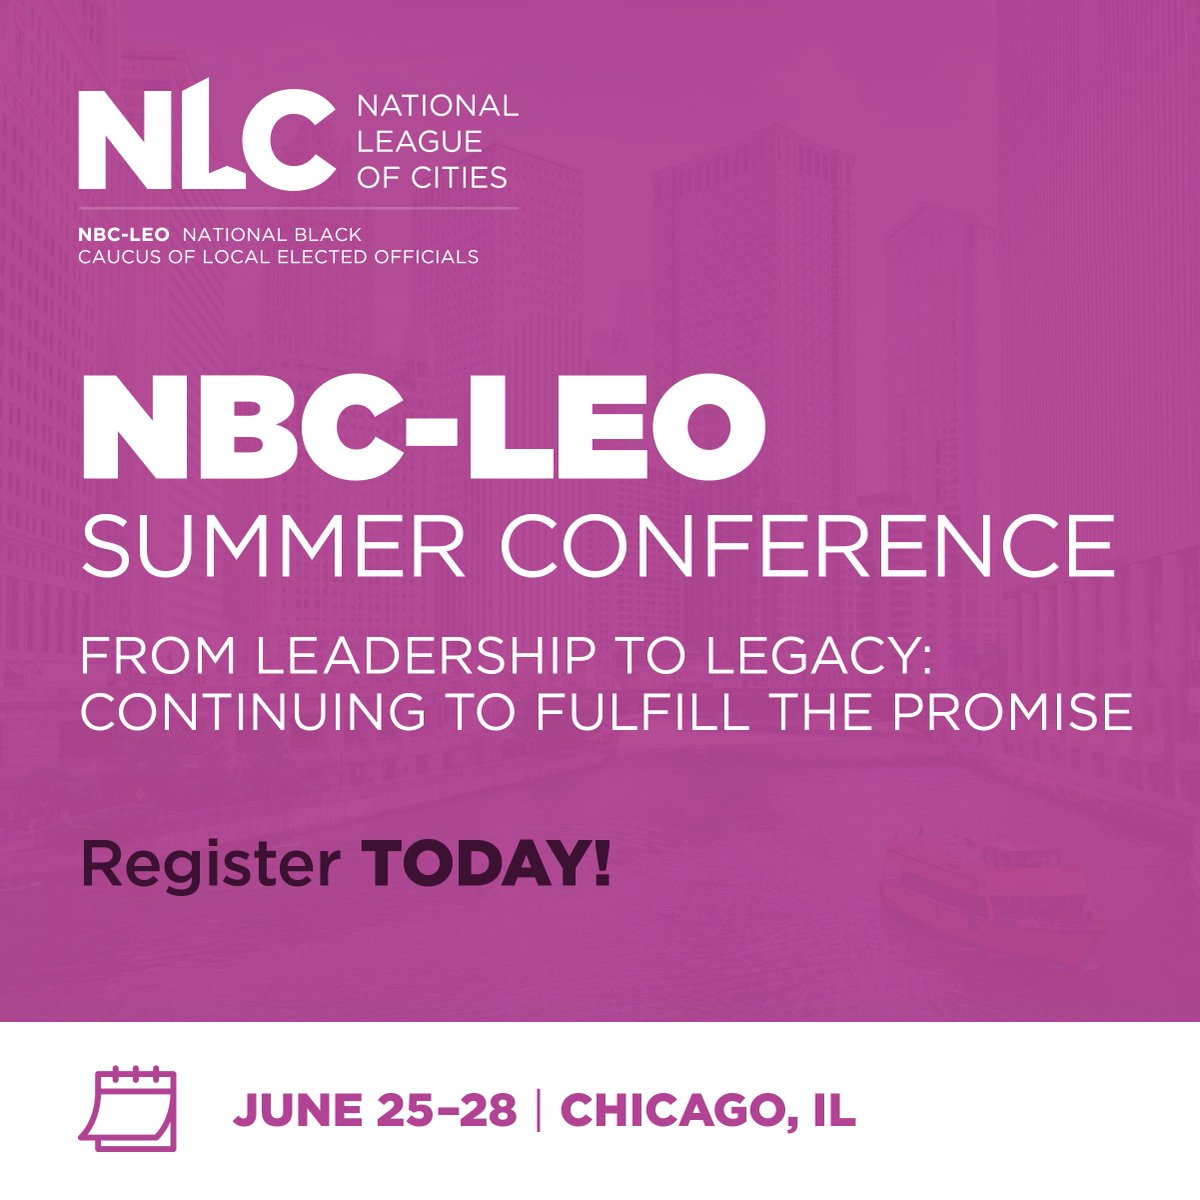 This June & July, NLC Constituency Groups will host their annual summer events, offering elected officials and municipal staff an opportunity to connect, share best practices and explore creative solutions to challenges in their communities. Learn more: nlc.org/conferences-me…